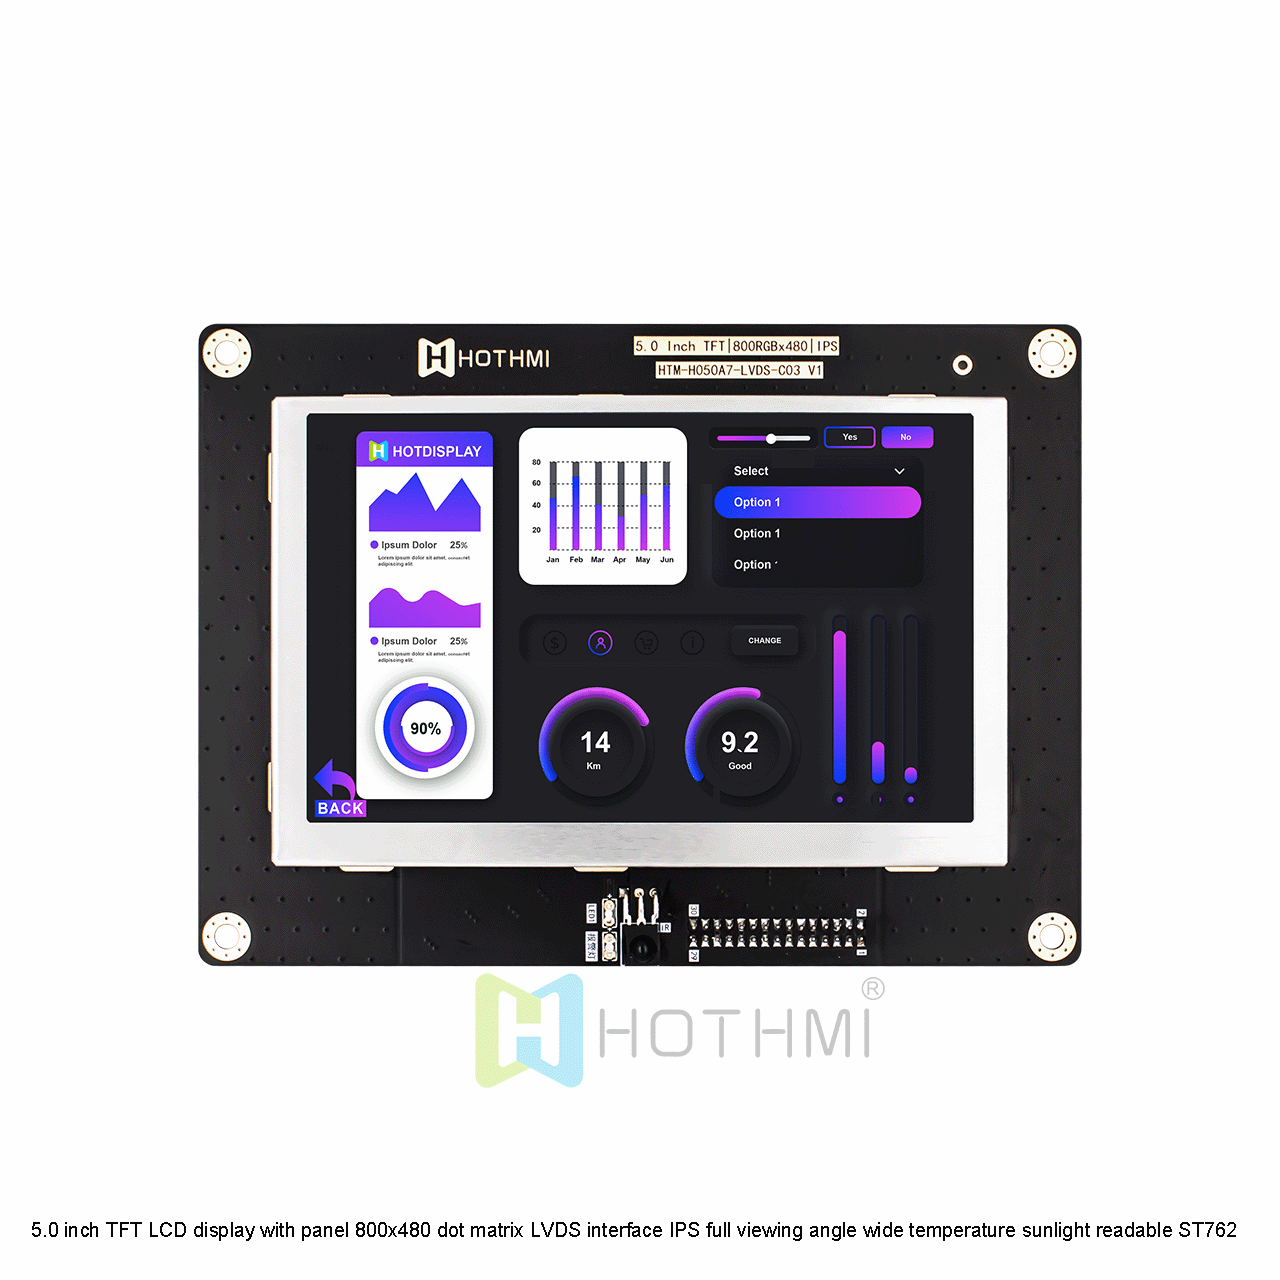 5.0 inch TFT LCD display with panel 800x480 dot matrix LVDS interface IPS full viewing angle wide temperature sunlight readable ST762 compatible with Android optional touch screen